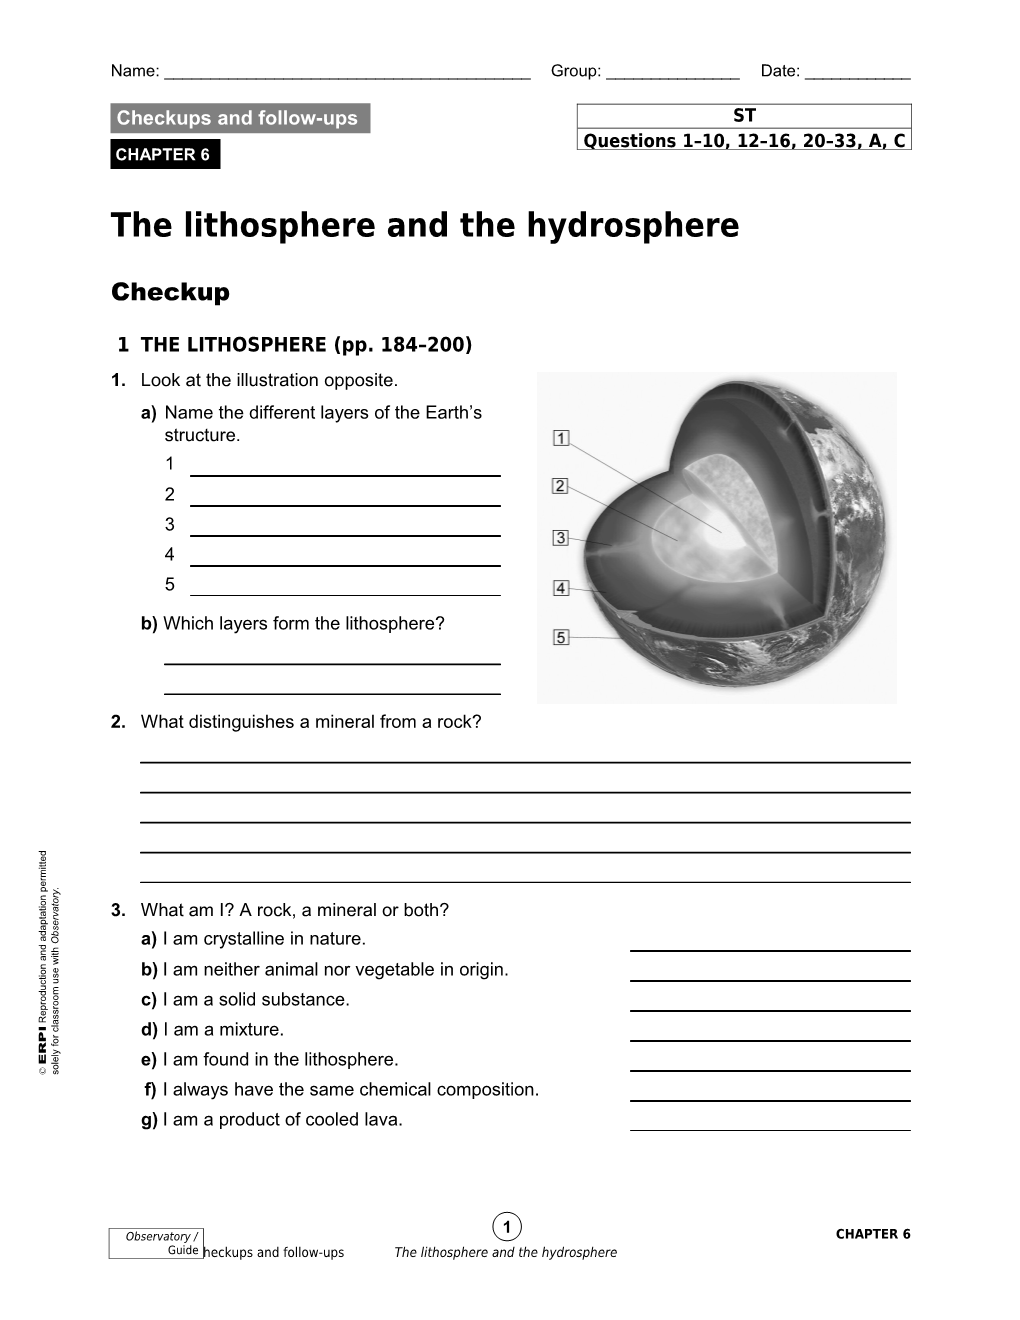 1 the Lithosphere (Pp. 184 200)